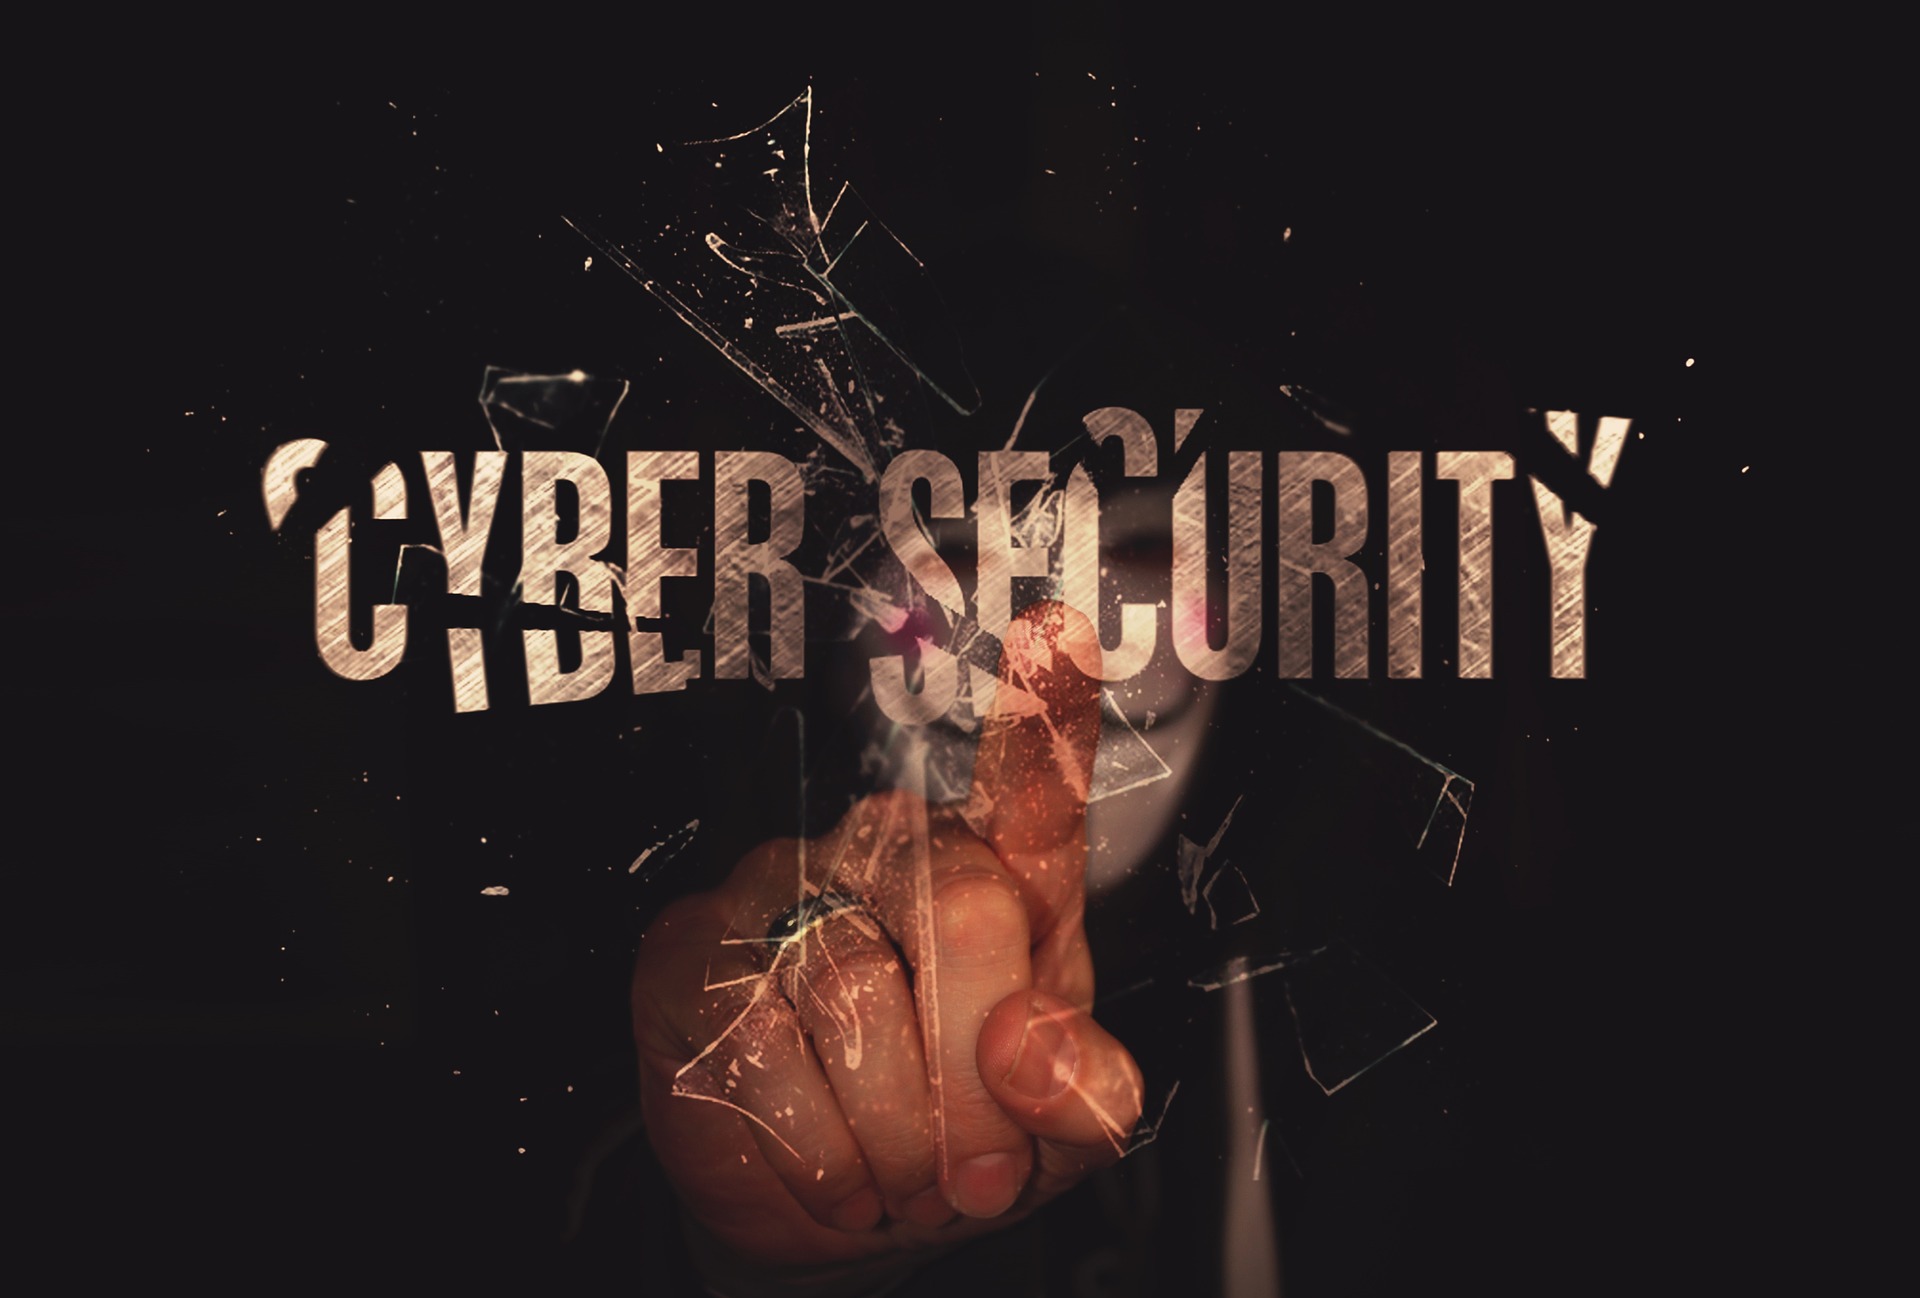 Top 10 Cybersecurity Threats Every Business Should Be Aware of in 2023